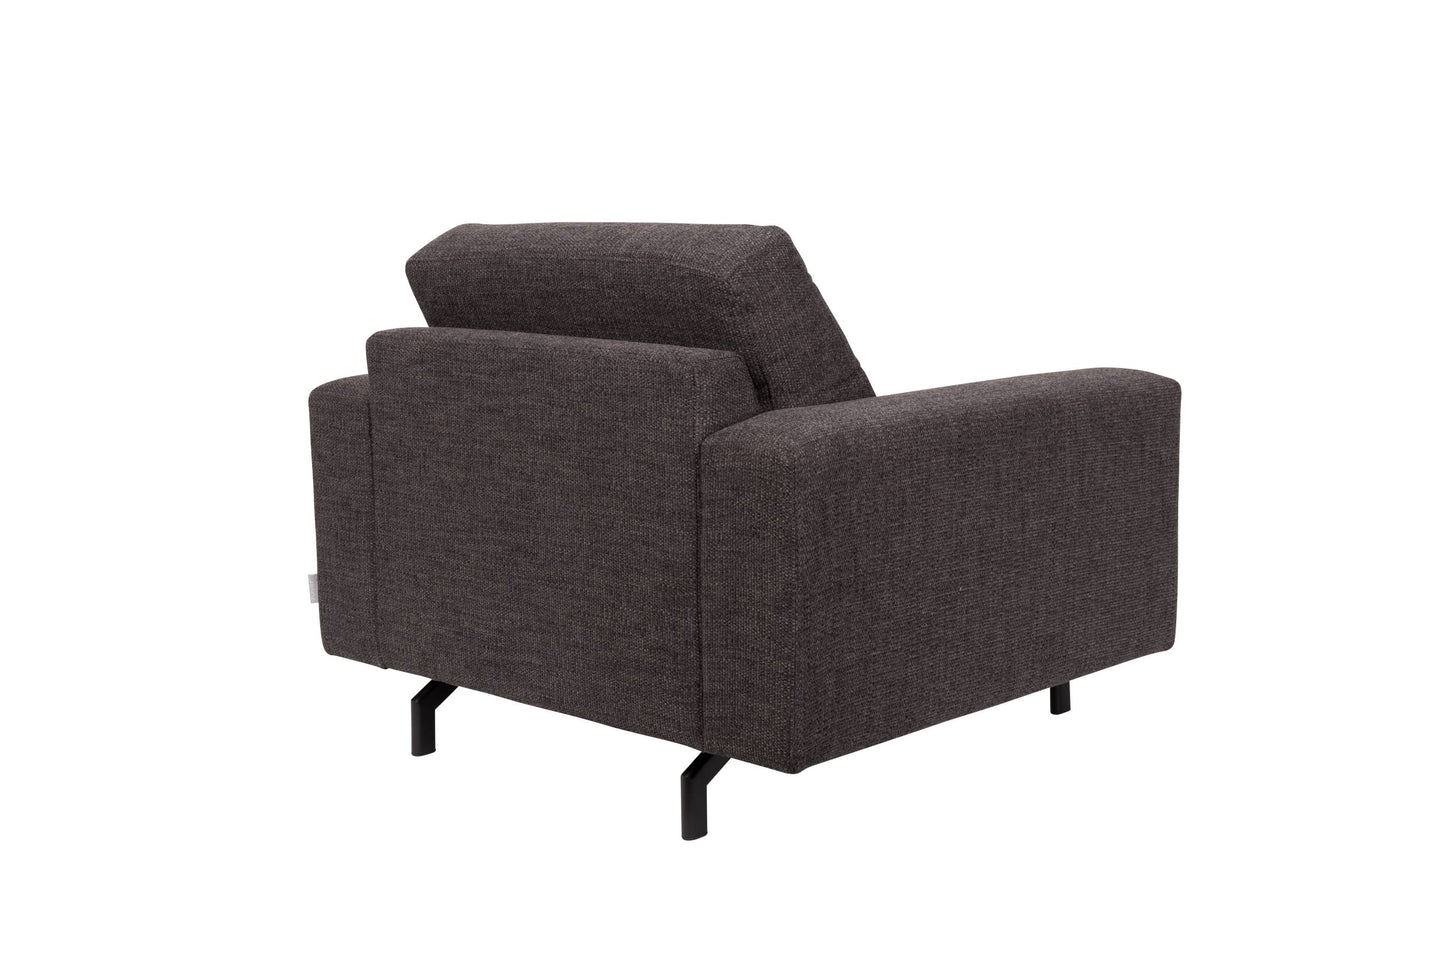 Zuiver | SOFA JEAN 1-SEATER ANTRACITE Default Title